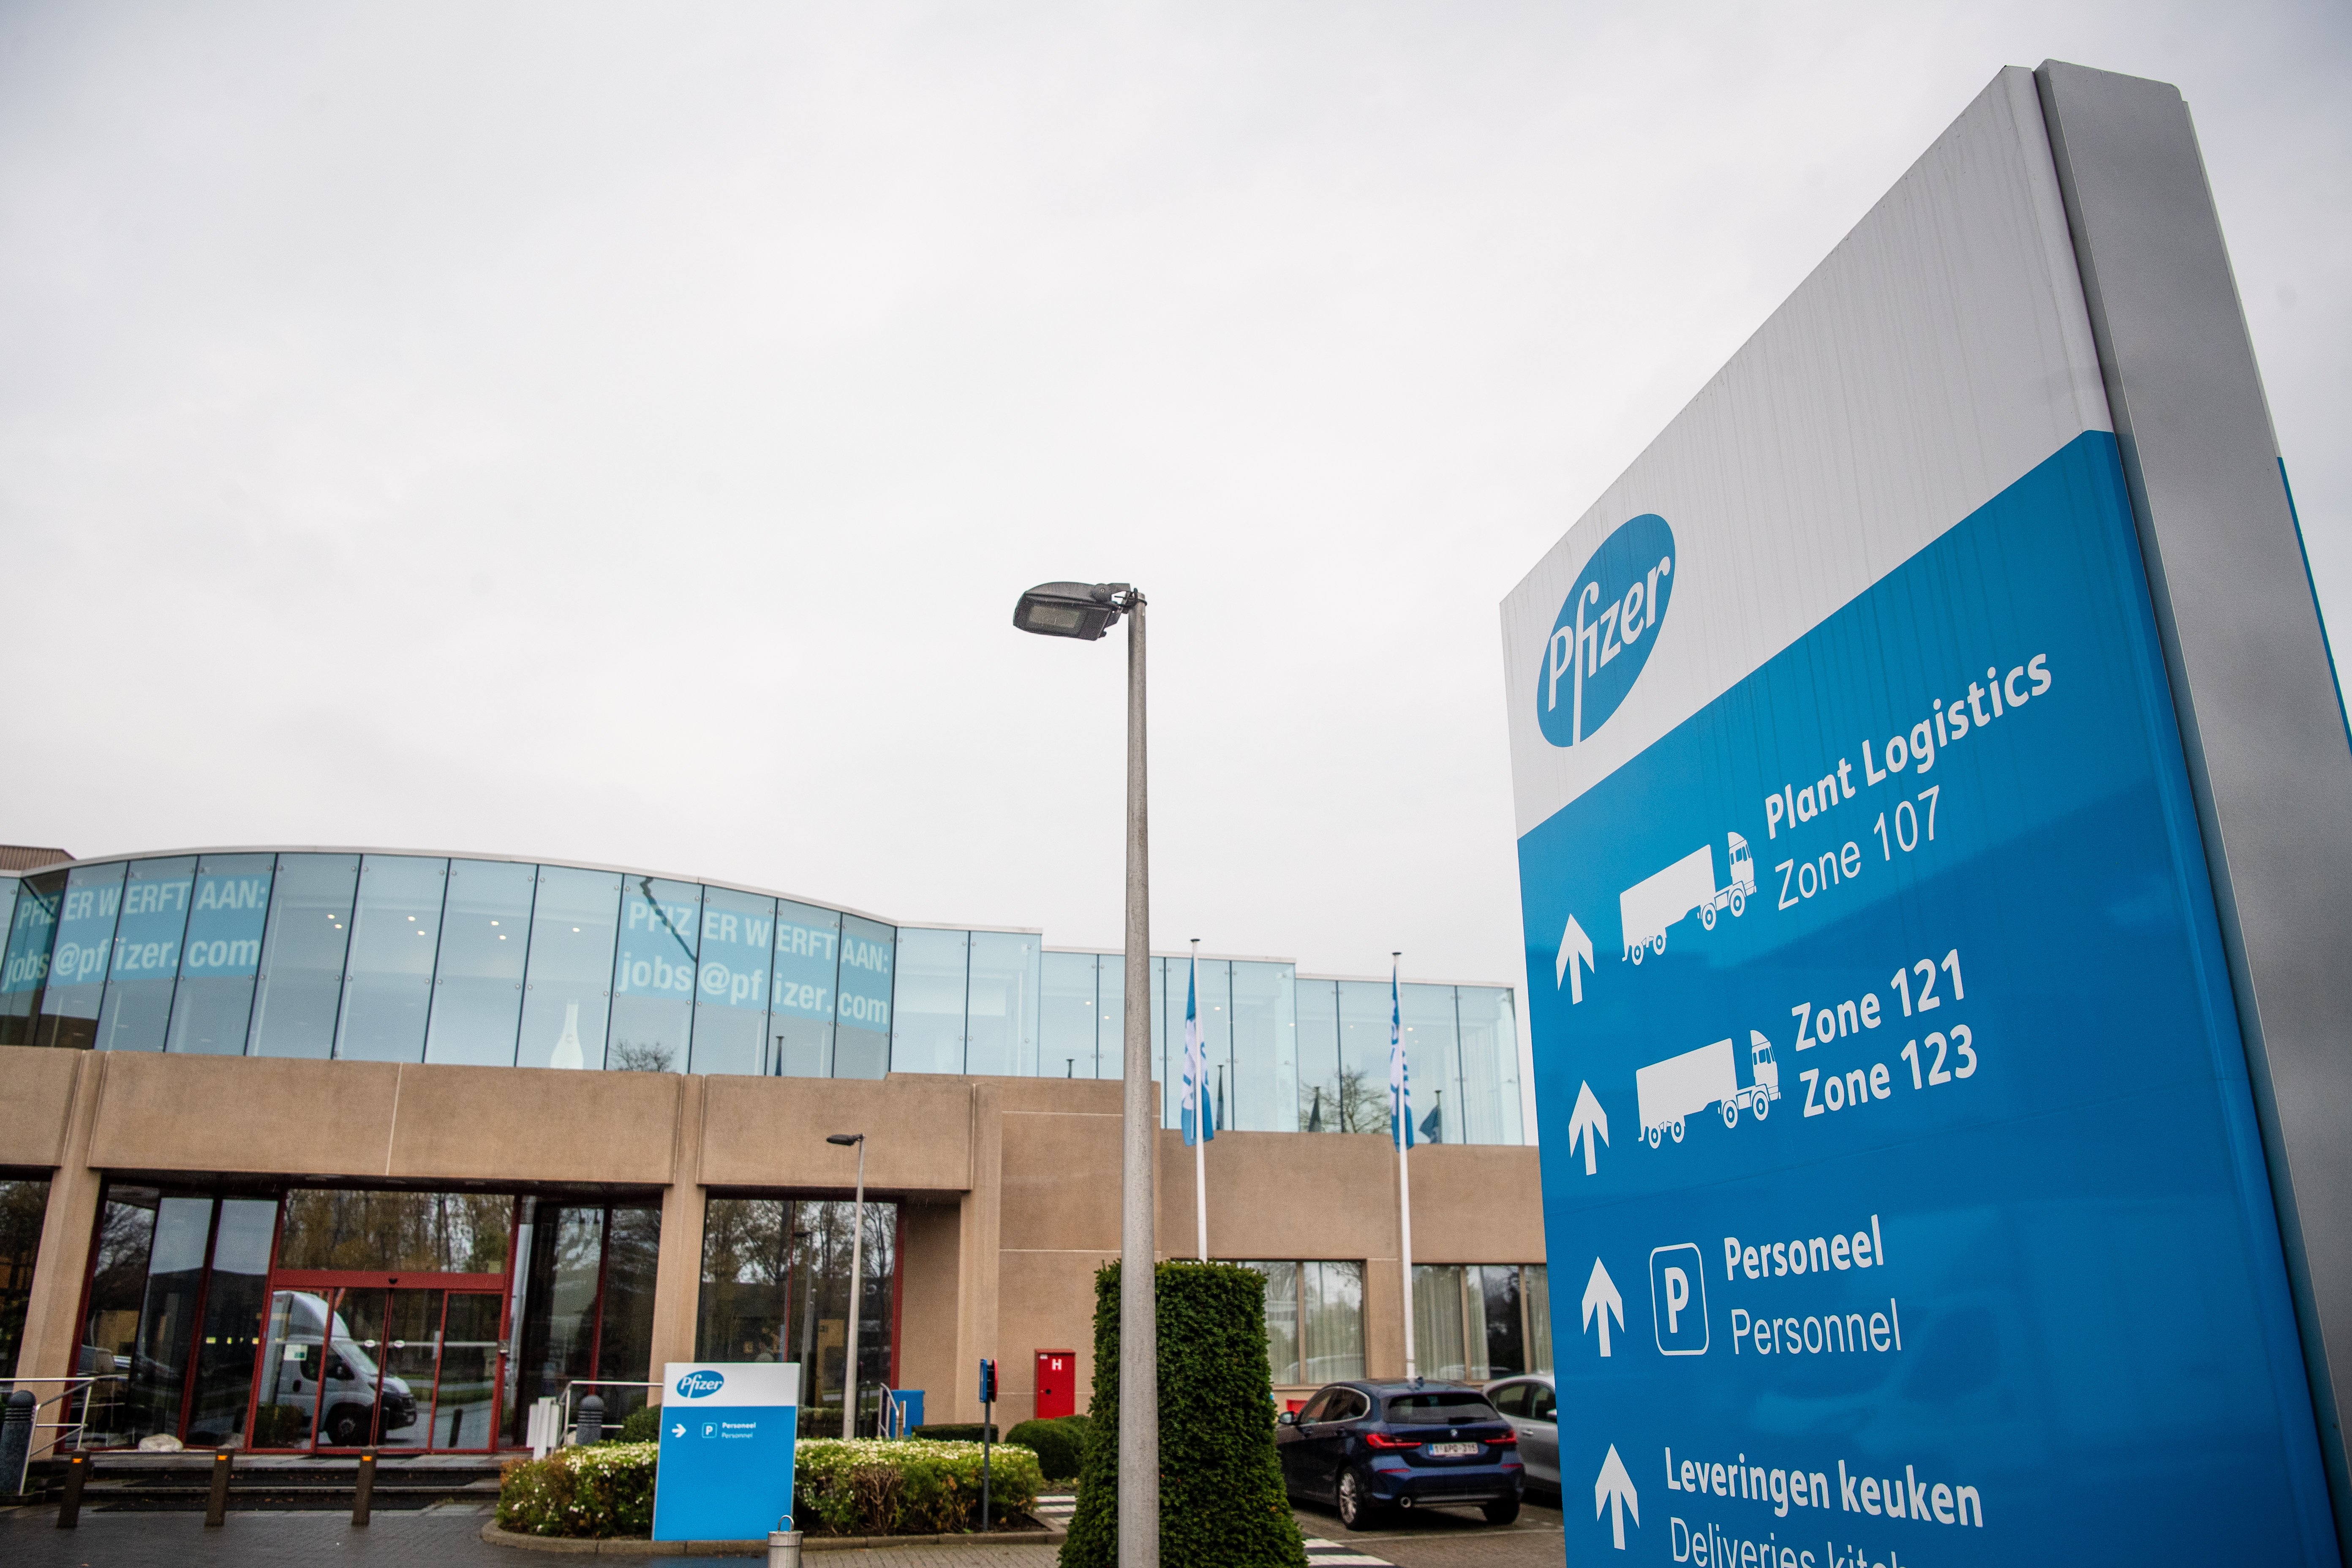 The Pfizer BioNTech vaccine is being manufactured in Belgium